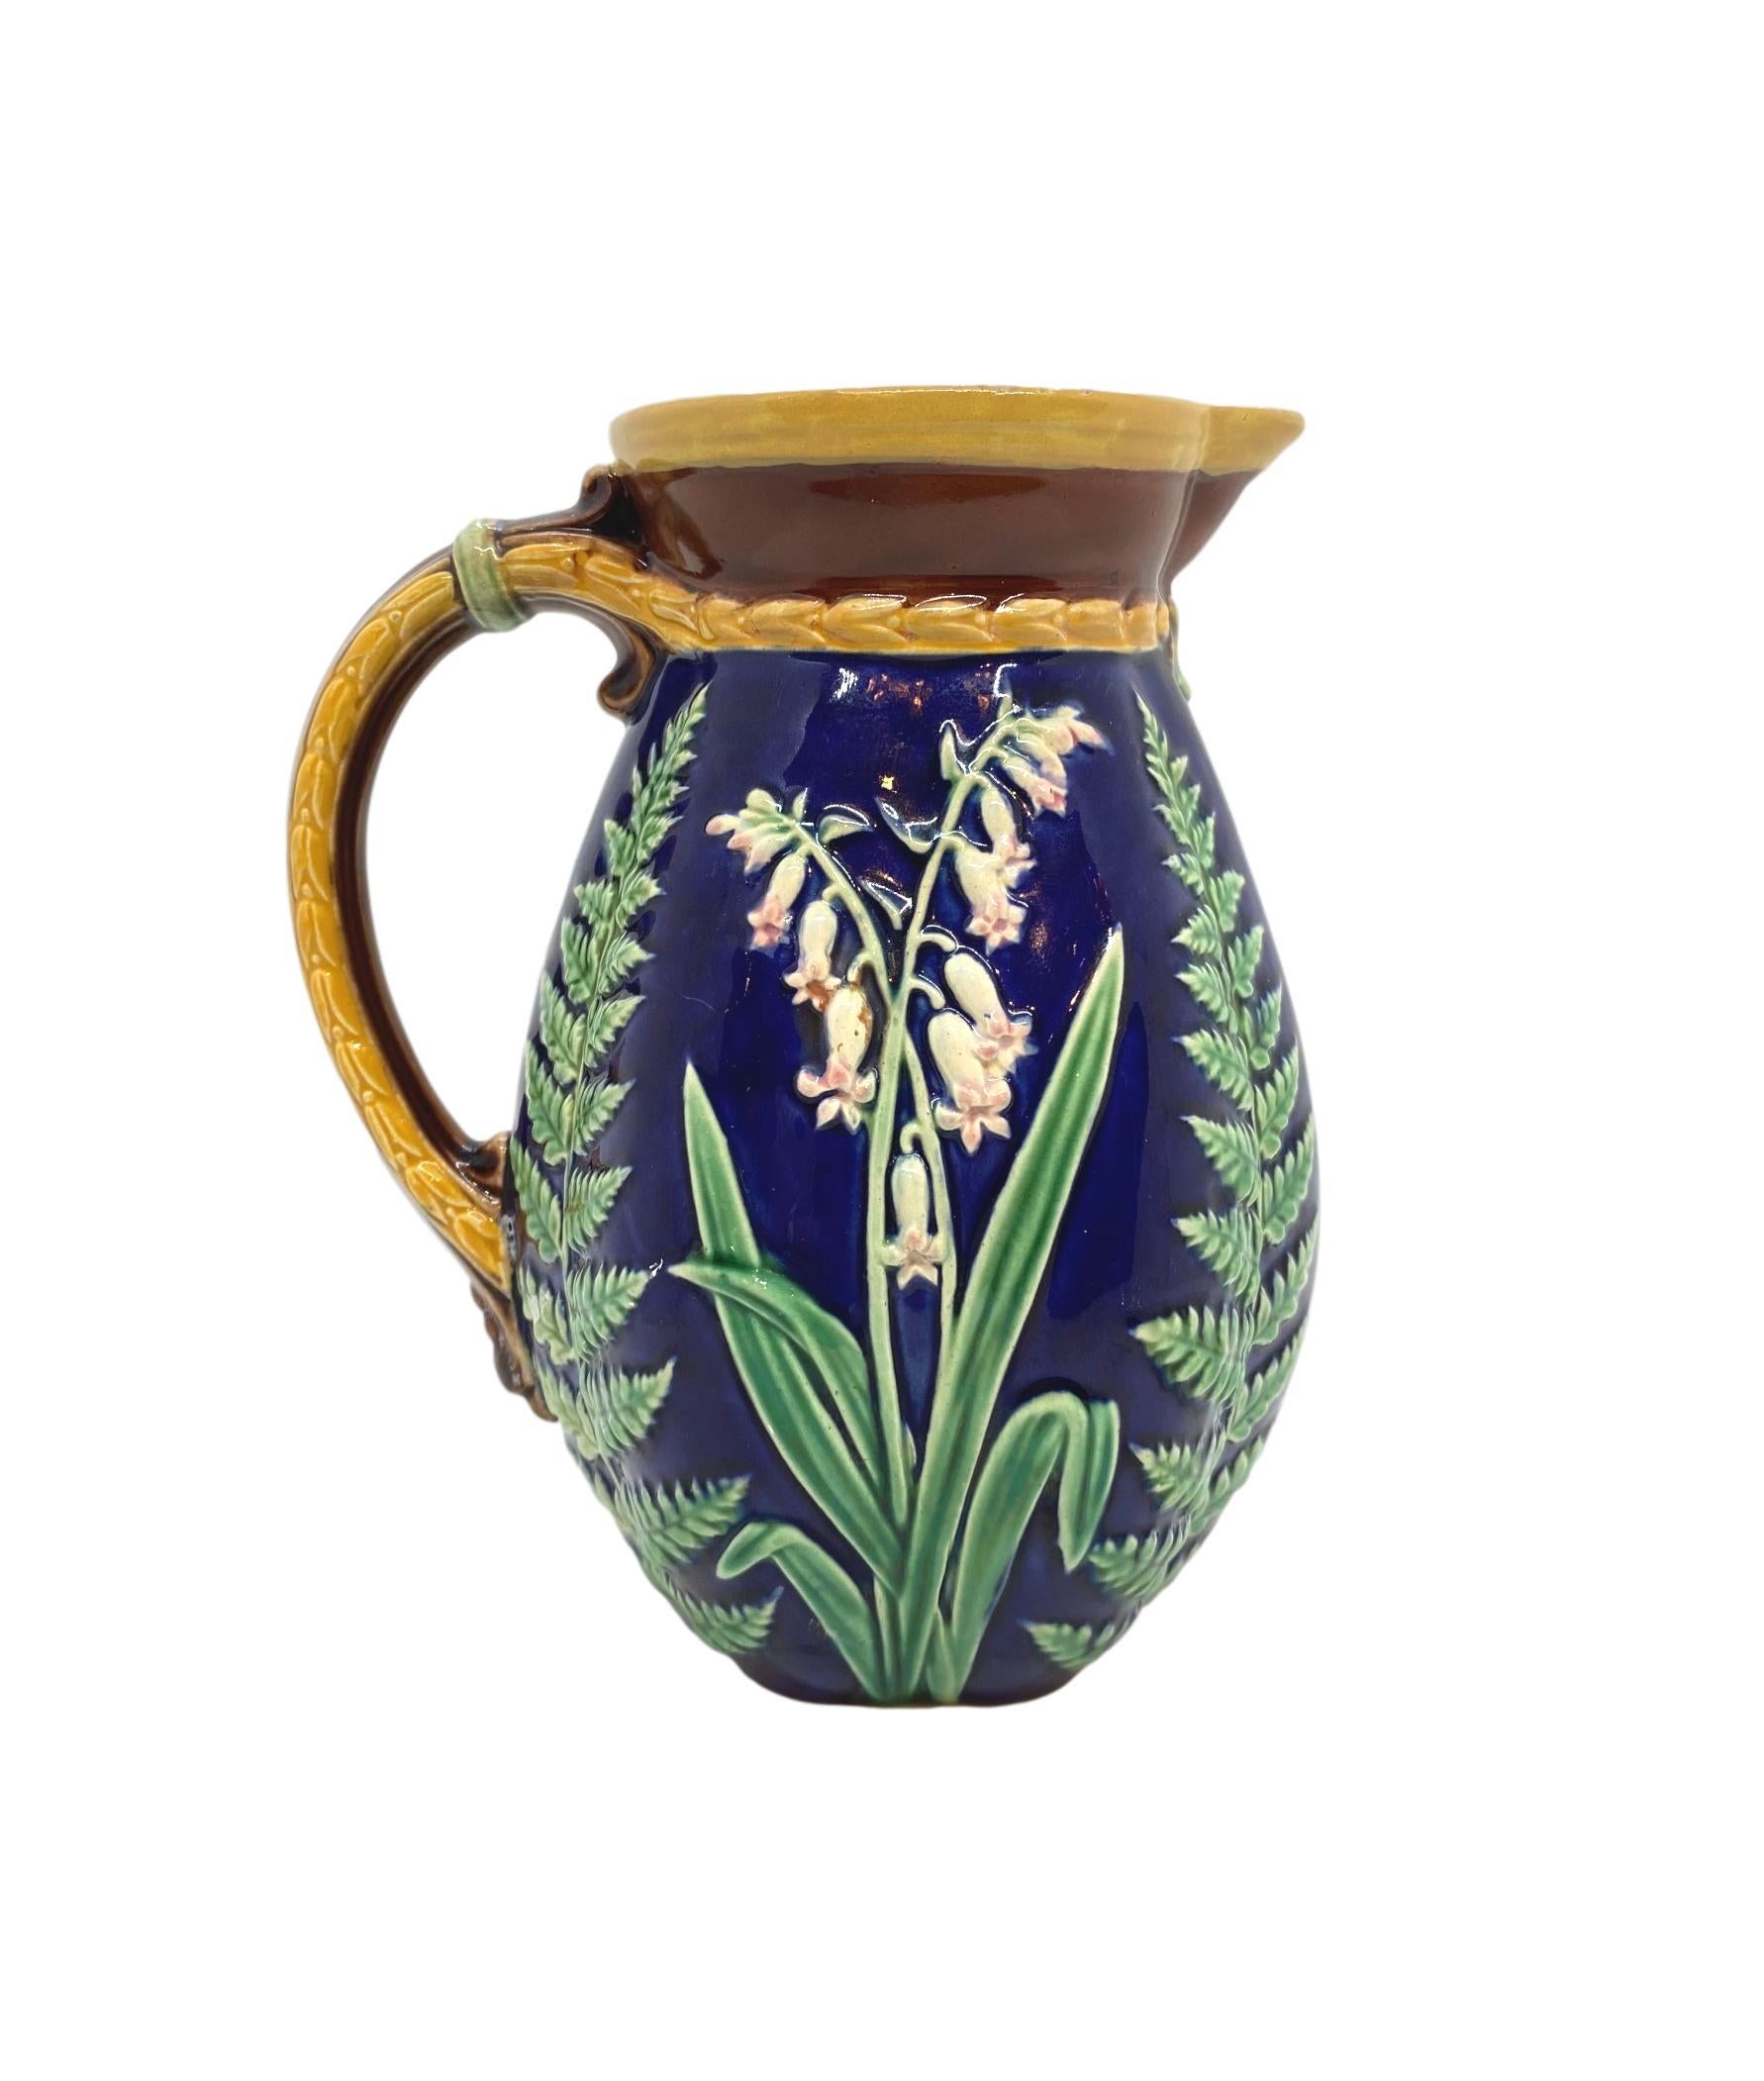 T.C. Brown-Westhead Moore & Co. Majolica Pitcher, Lilies of the Valley and Ferns on a Cobalt Blue ground, the reverse with British Registry lozenge for 24 September 1871, with painted design number and impressed mark for T.C. Brown-Westhead Moore &